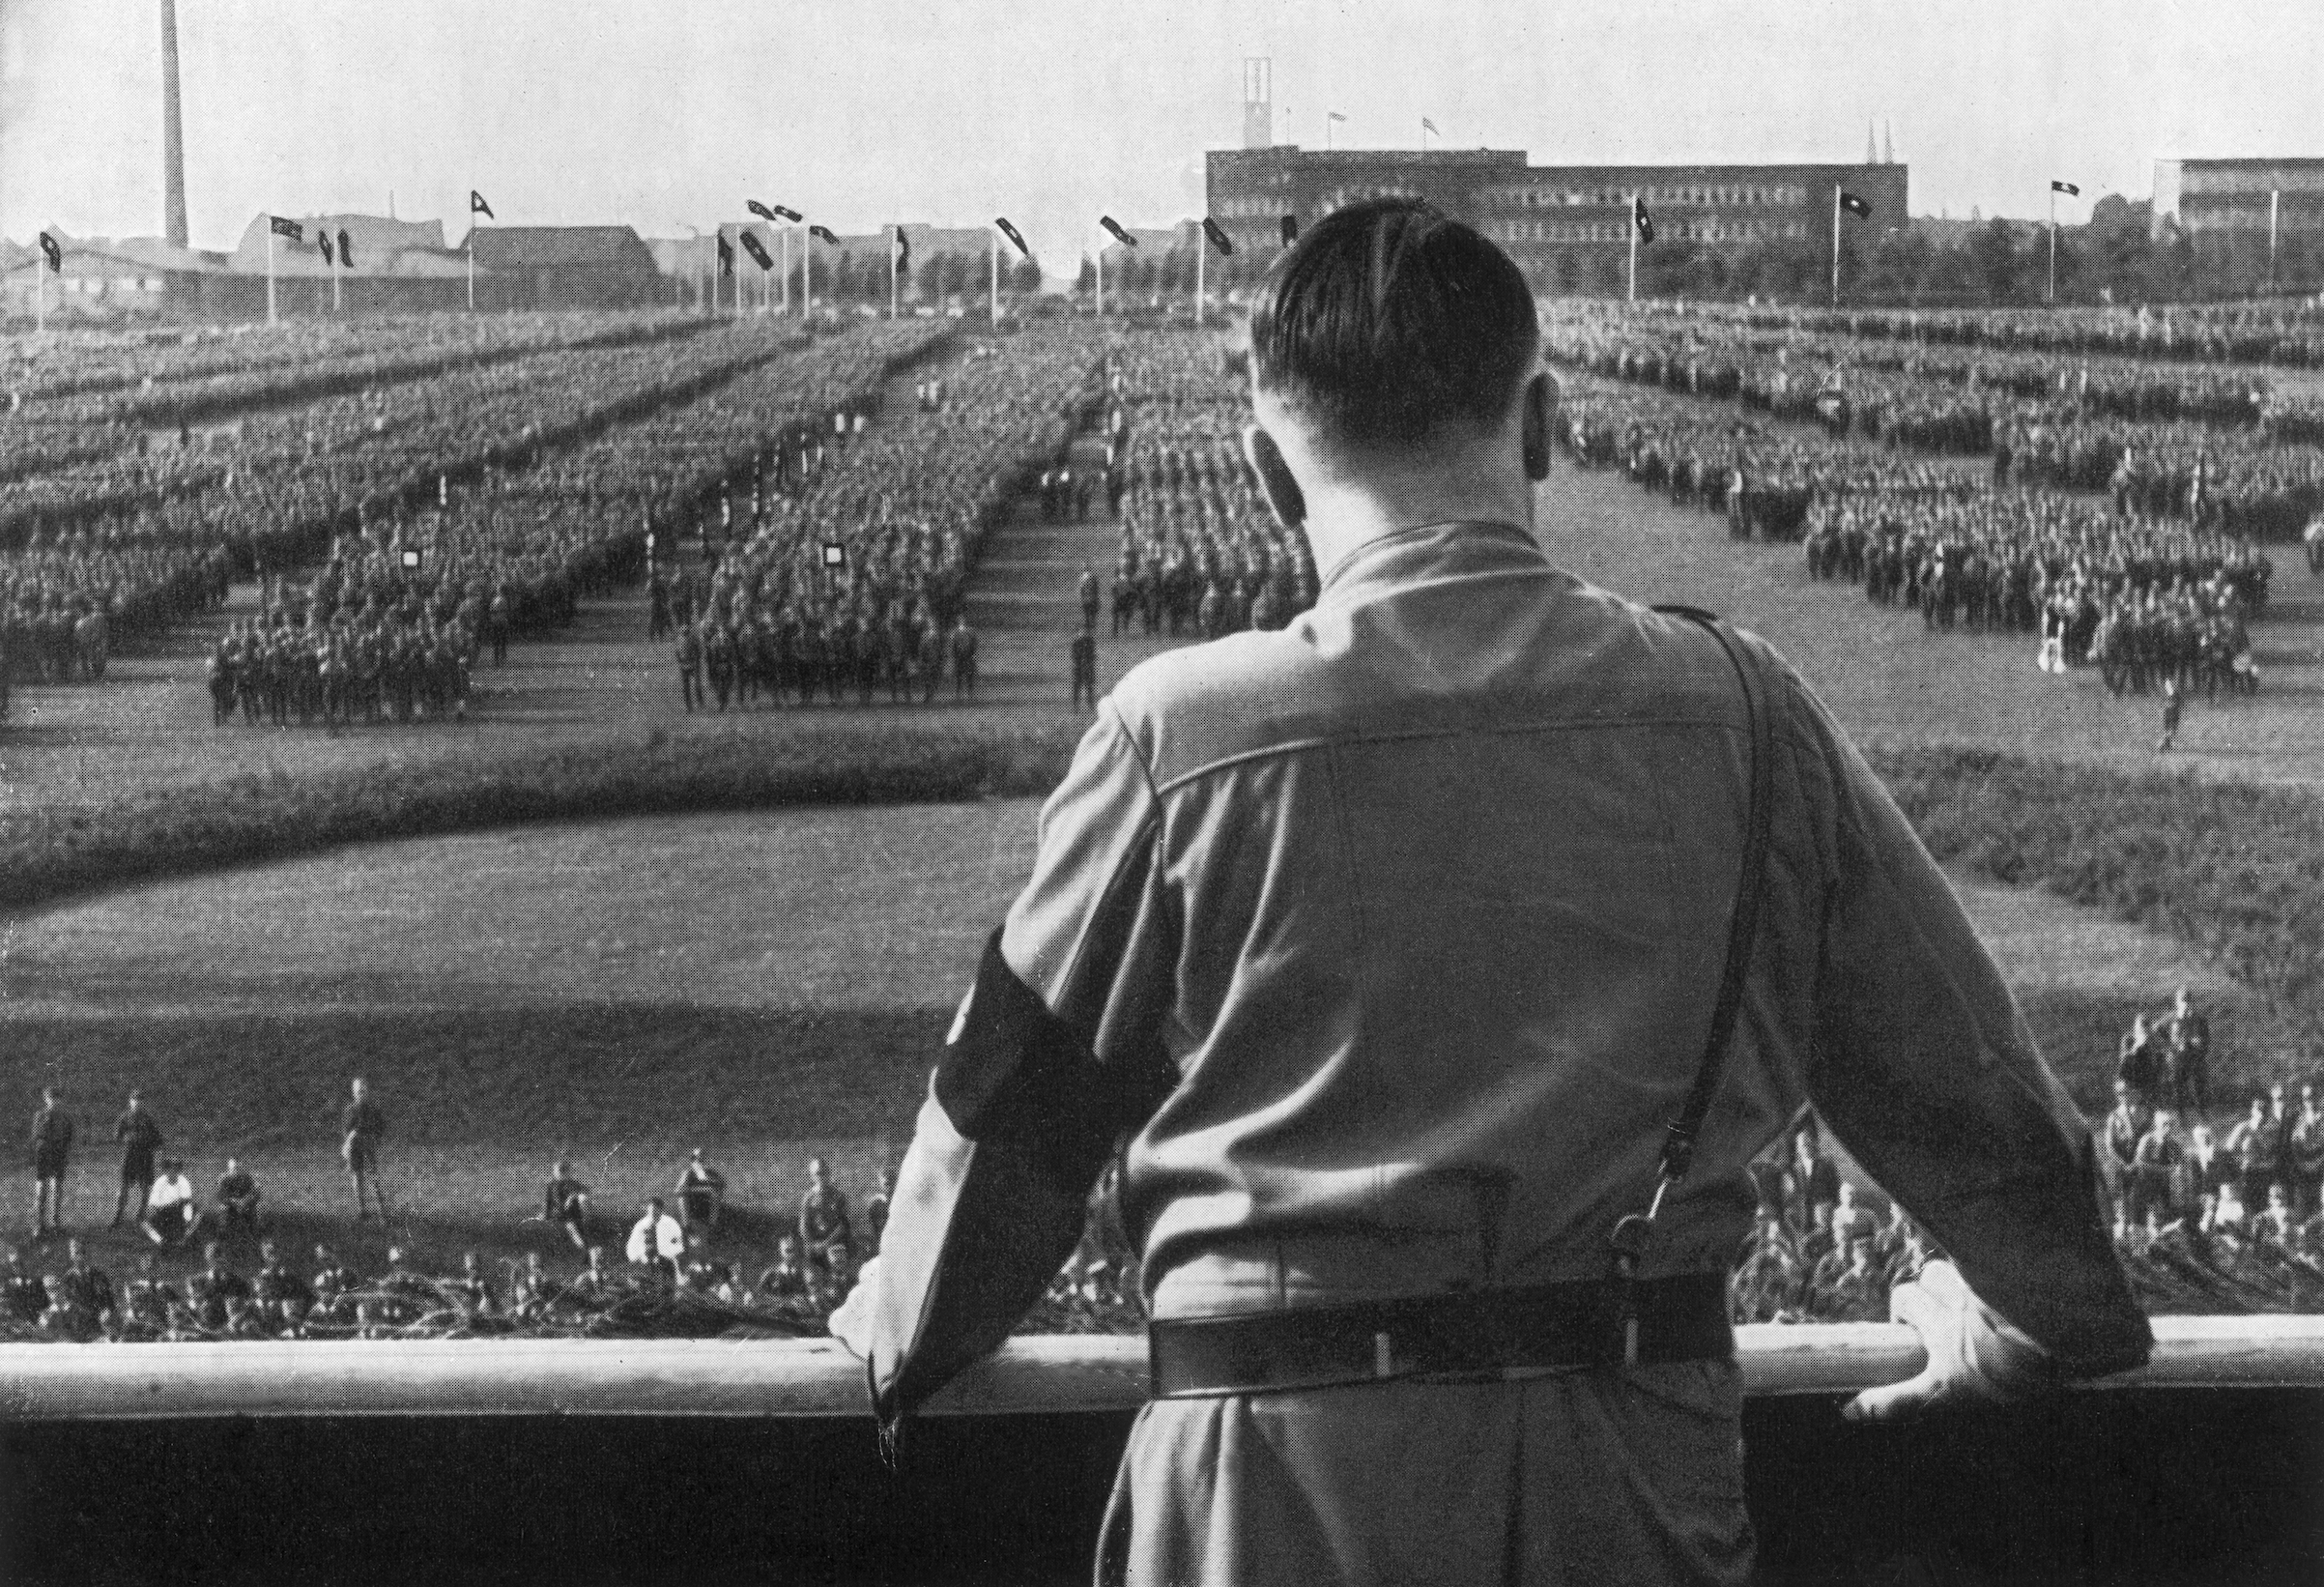 Nazi leader Adolf Hitler addresses soldiers with his back facing the camera at a Nazi rally in Dortmund, Germany, in 1933. (Getty Images)